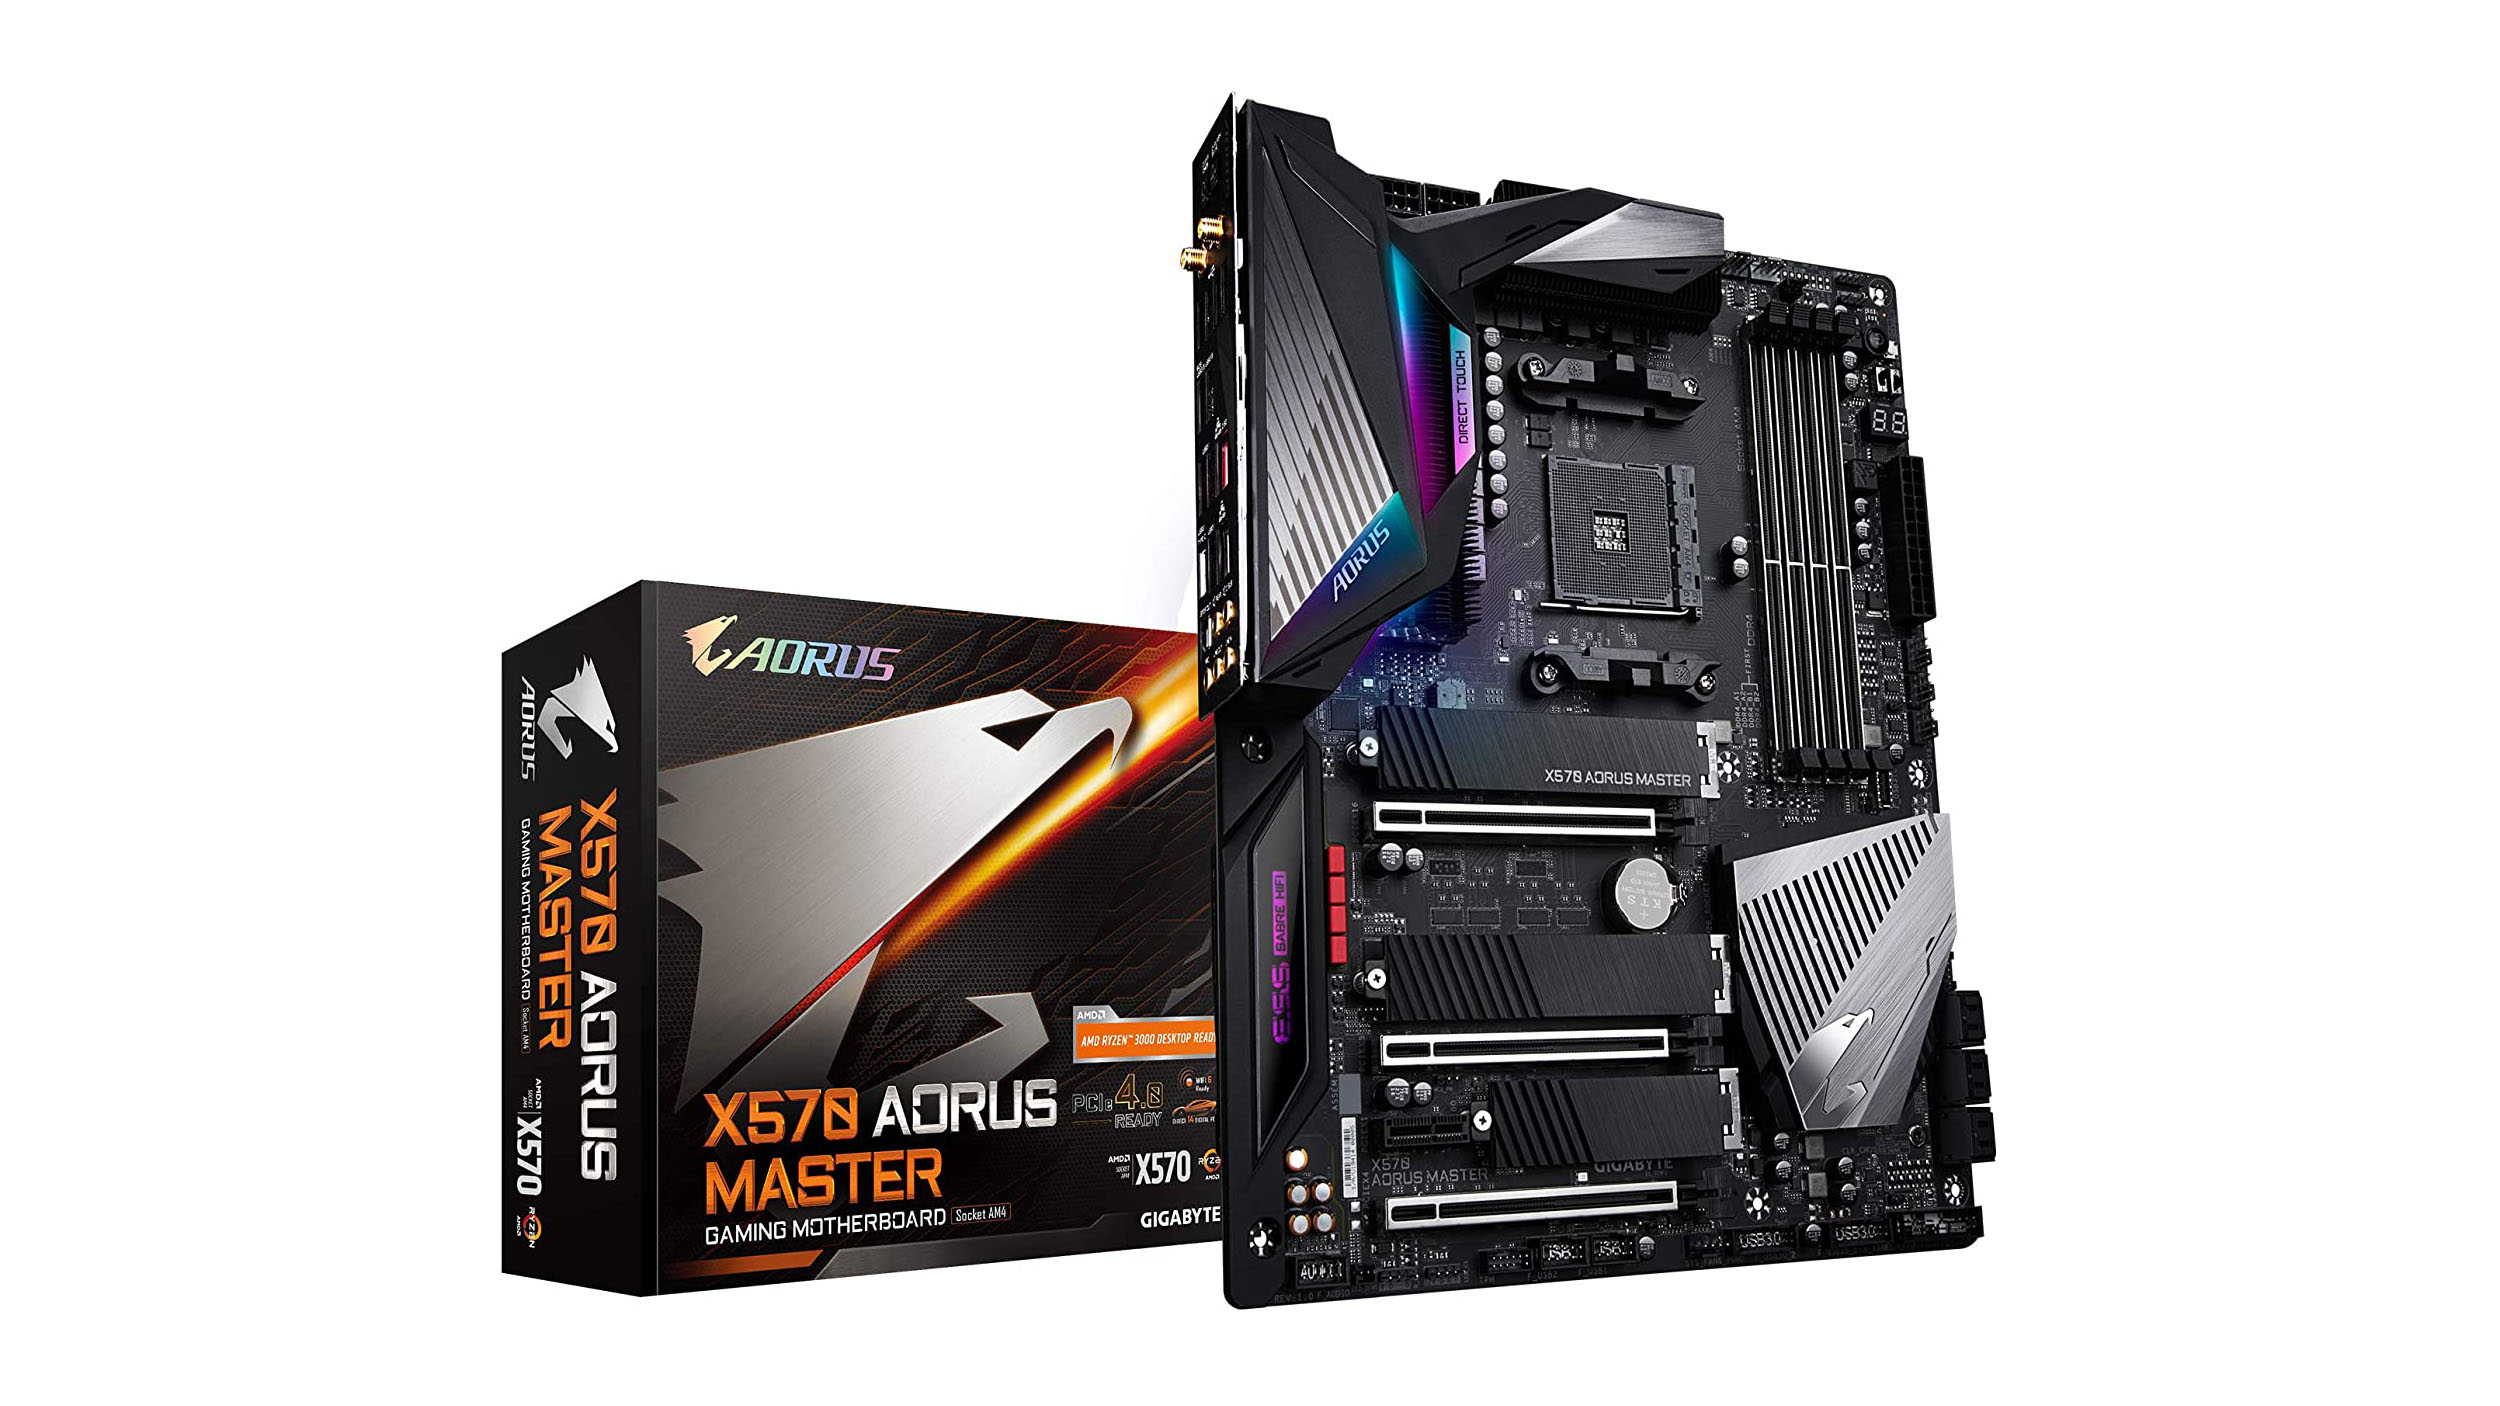 The Gigabyte Aorus X570 Master can handle the latest 3rd gen AMD processors and multiple GPUs.